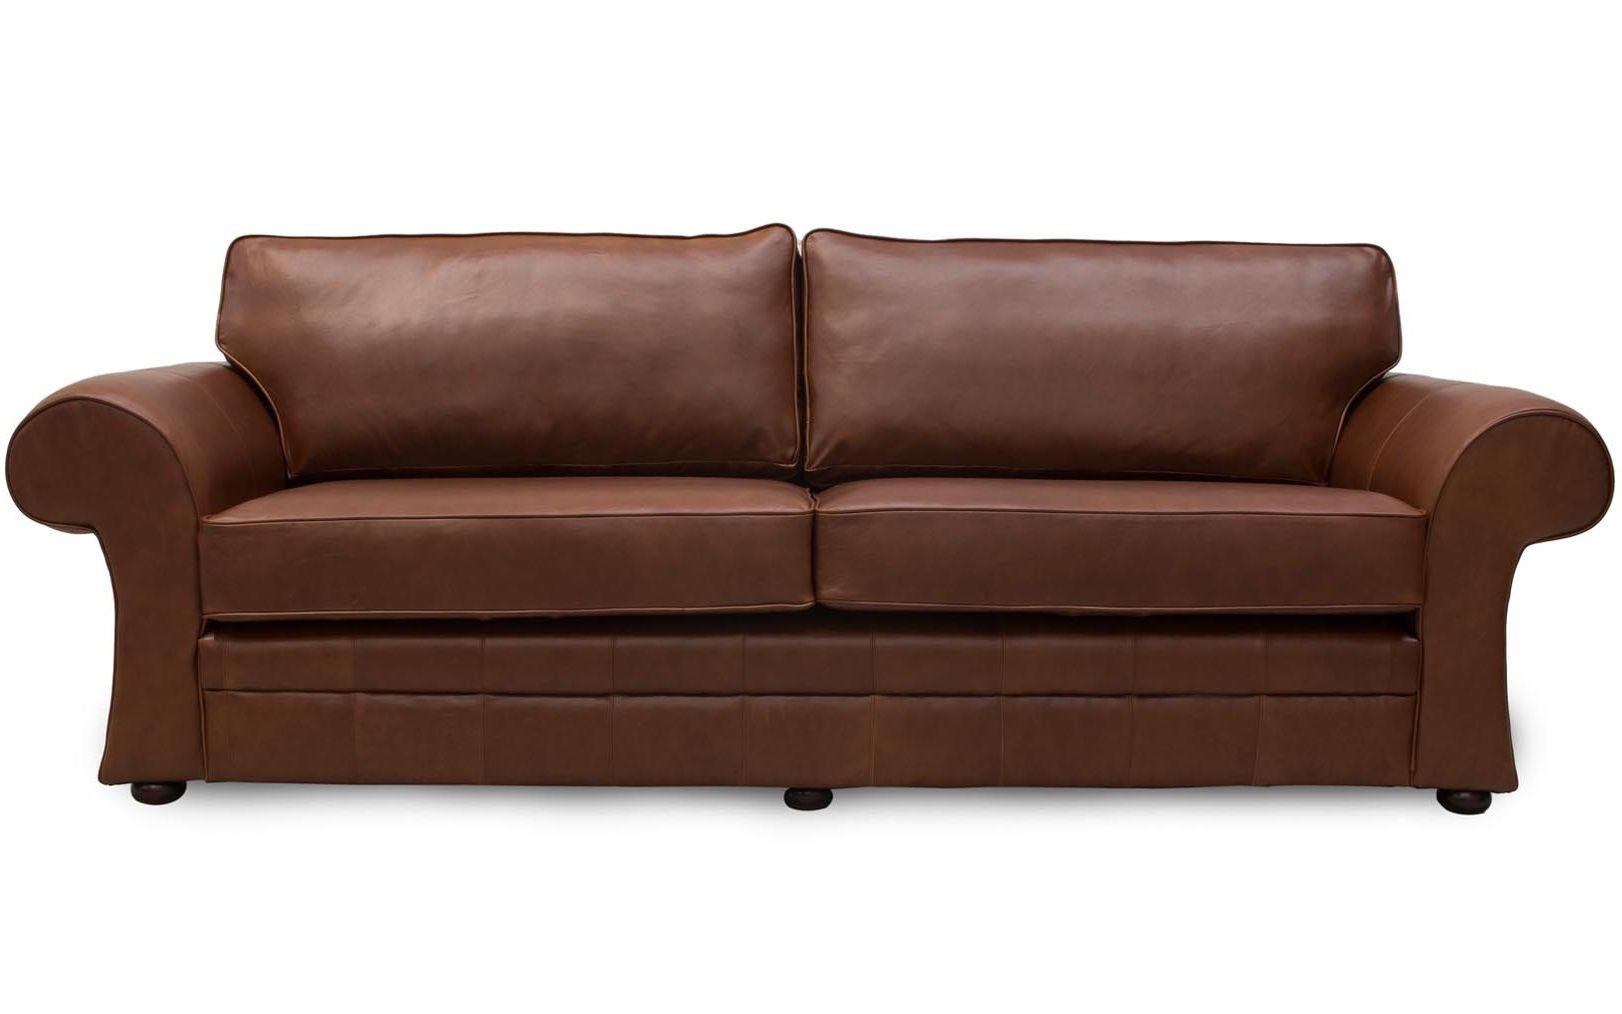 2019 Manchester Sofas With Regard To Cavan Scroll Arm Leather Sofa Made In Manchesterthe Leather (View 6 of 20)